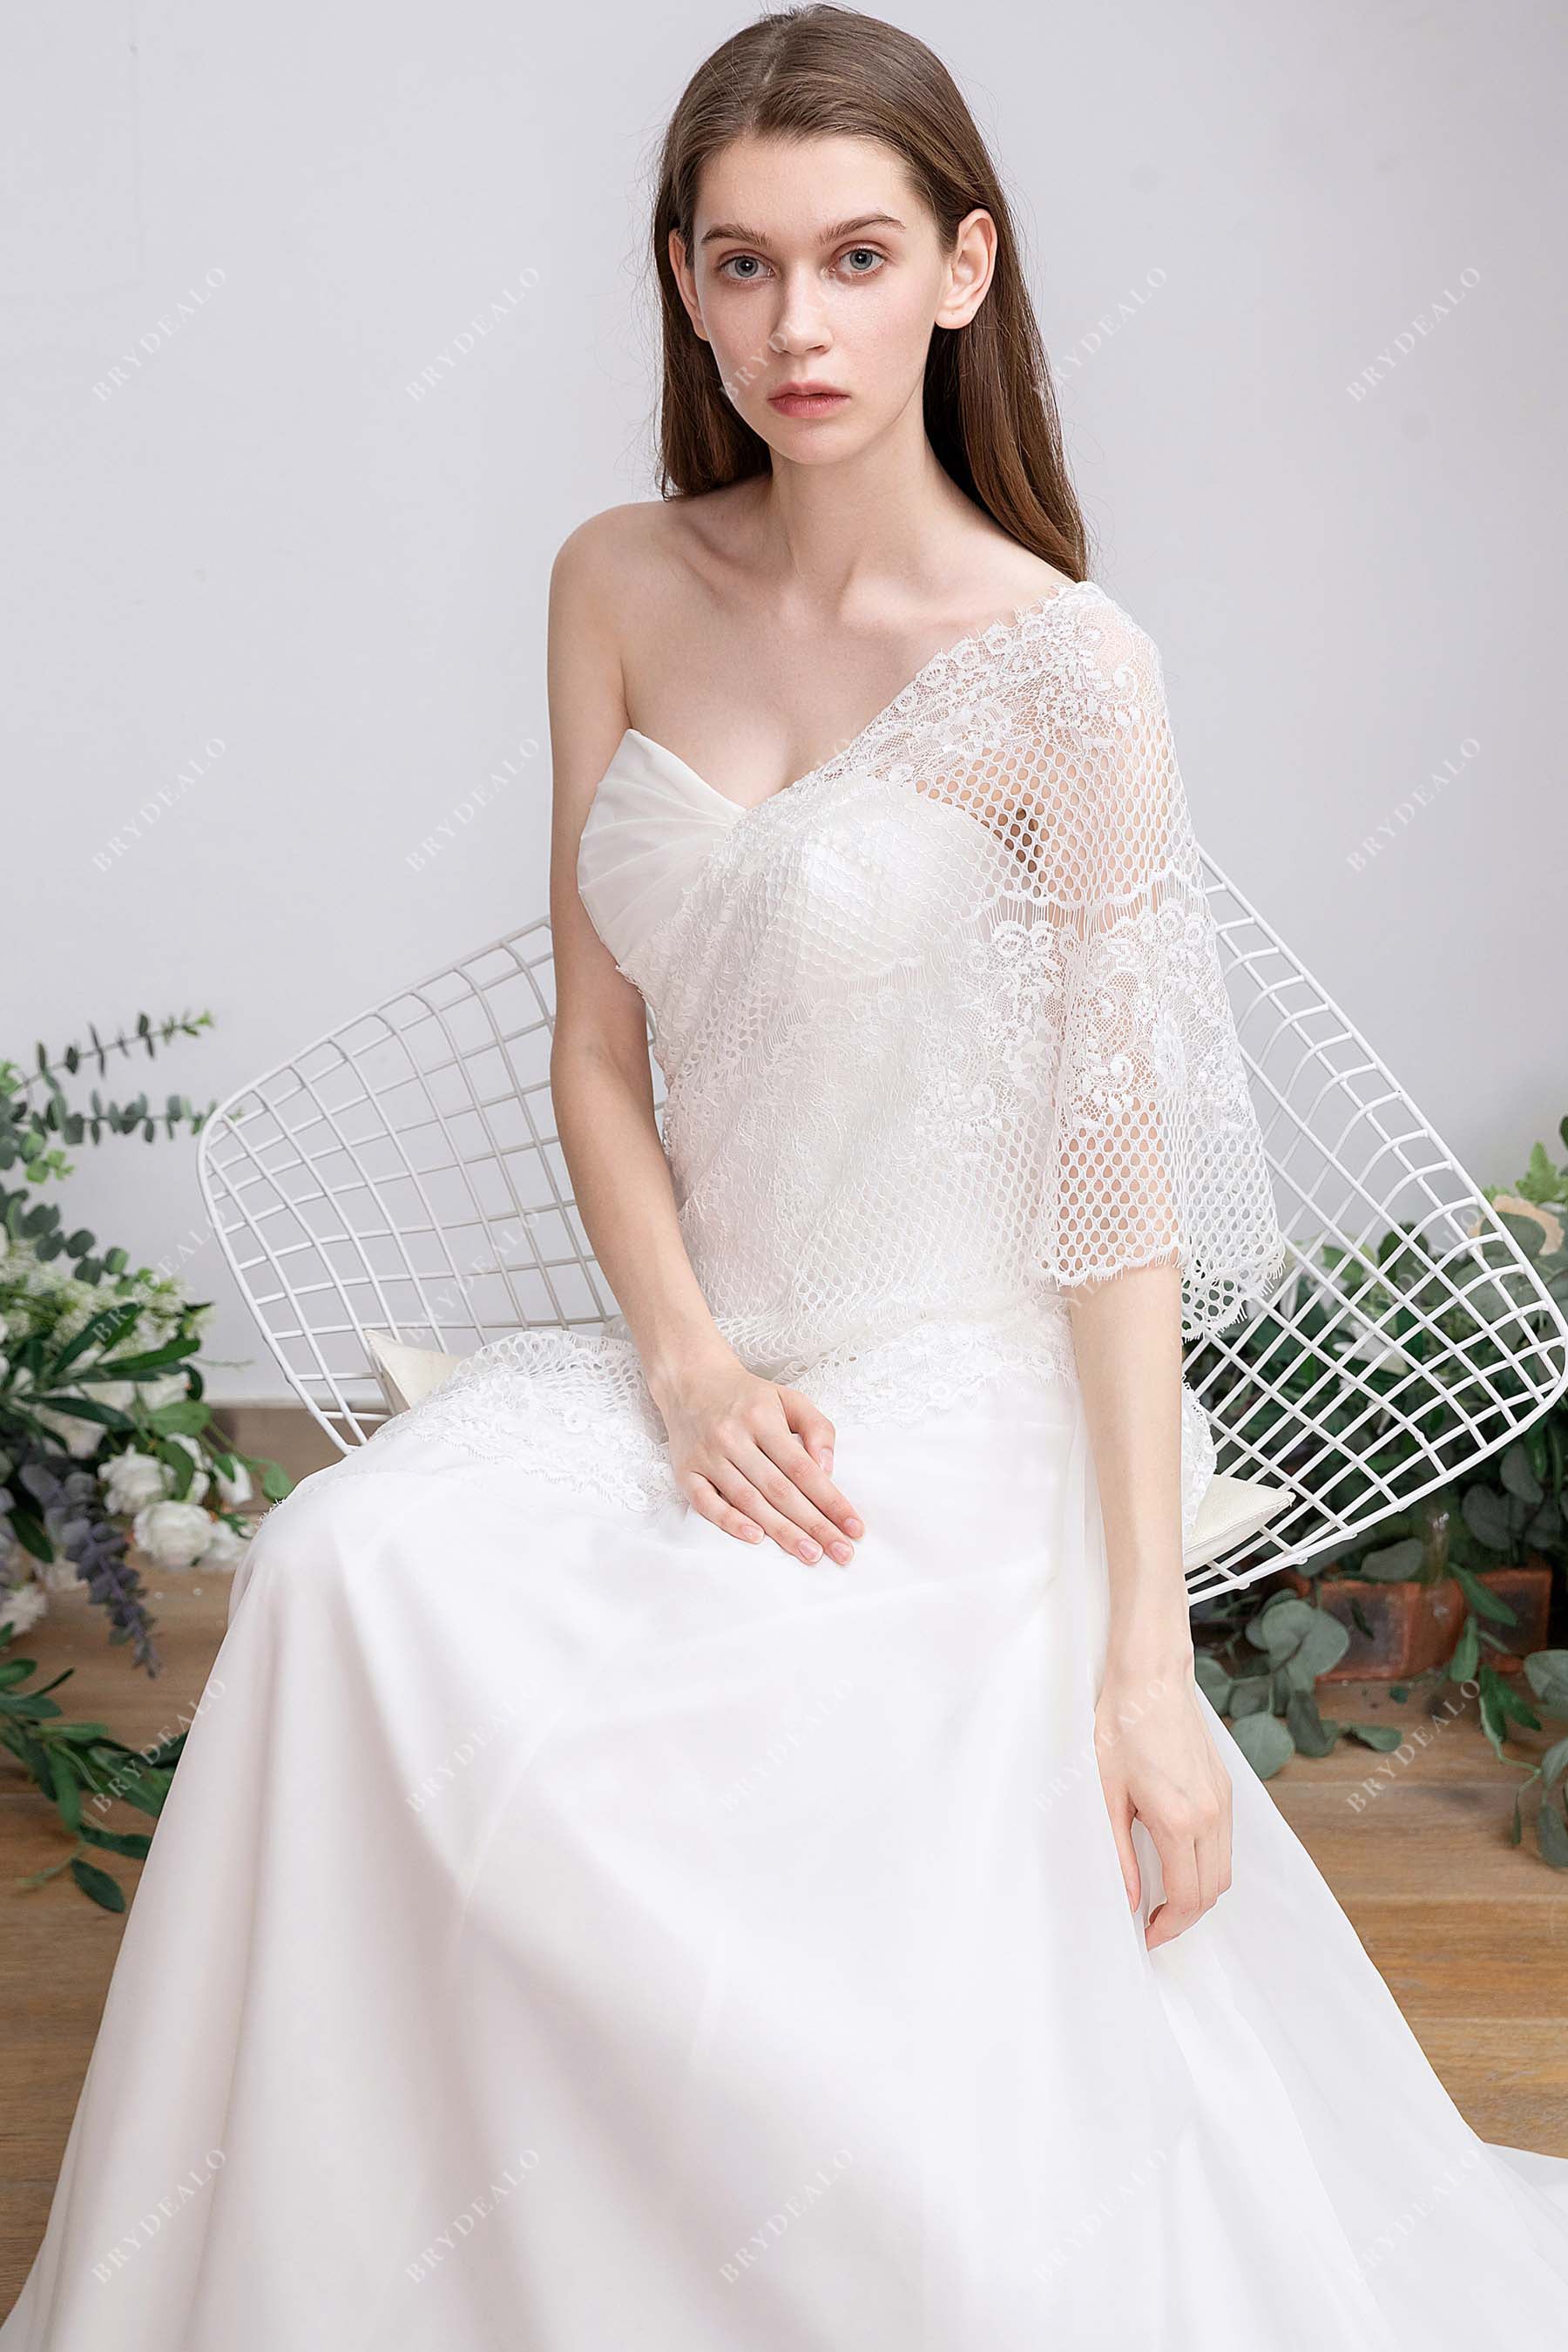 sweetheart neck lace coverups grecian bridal dress